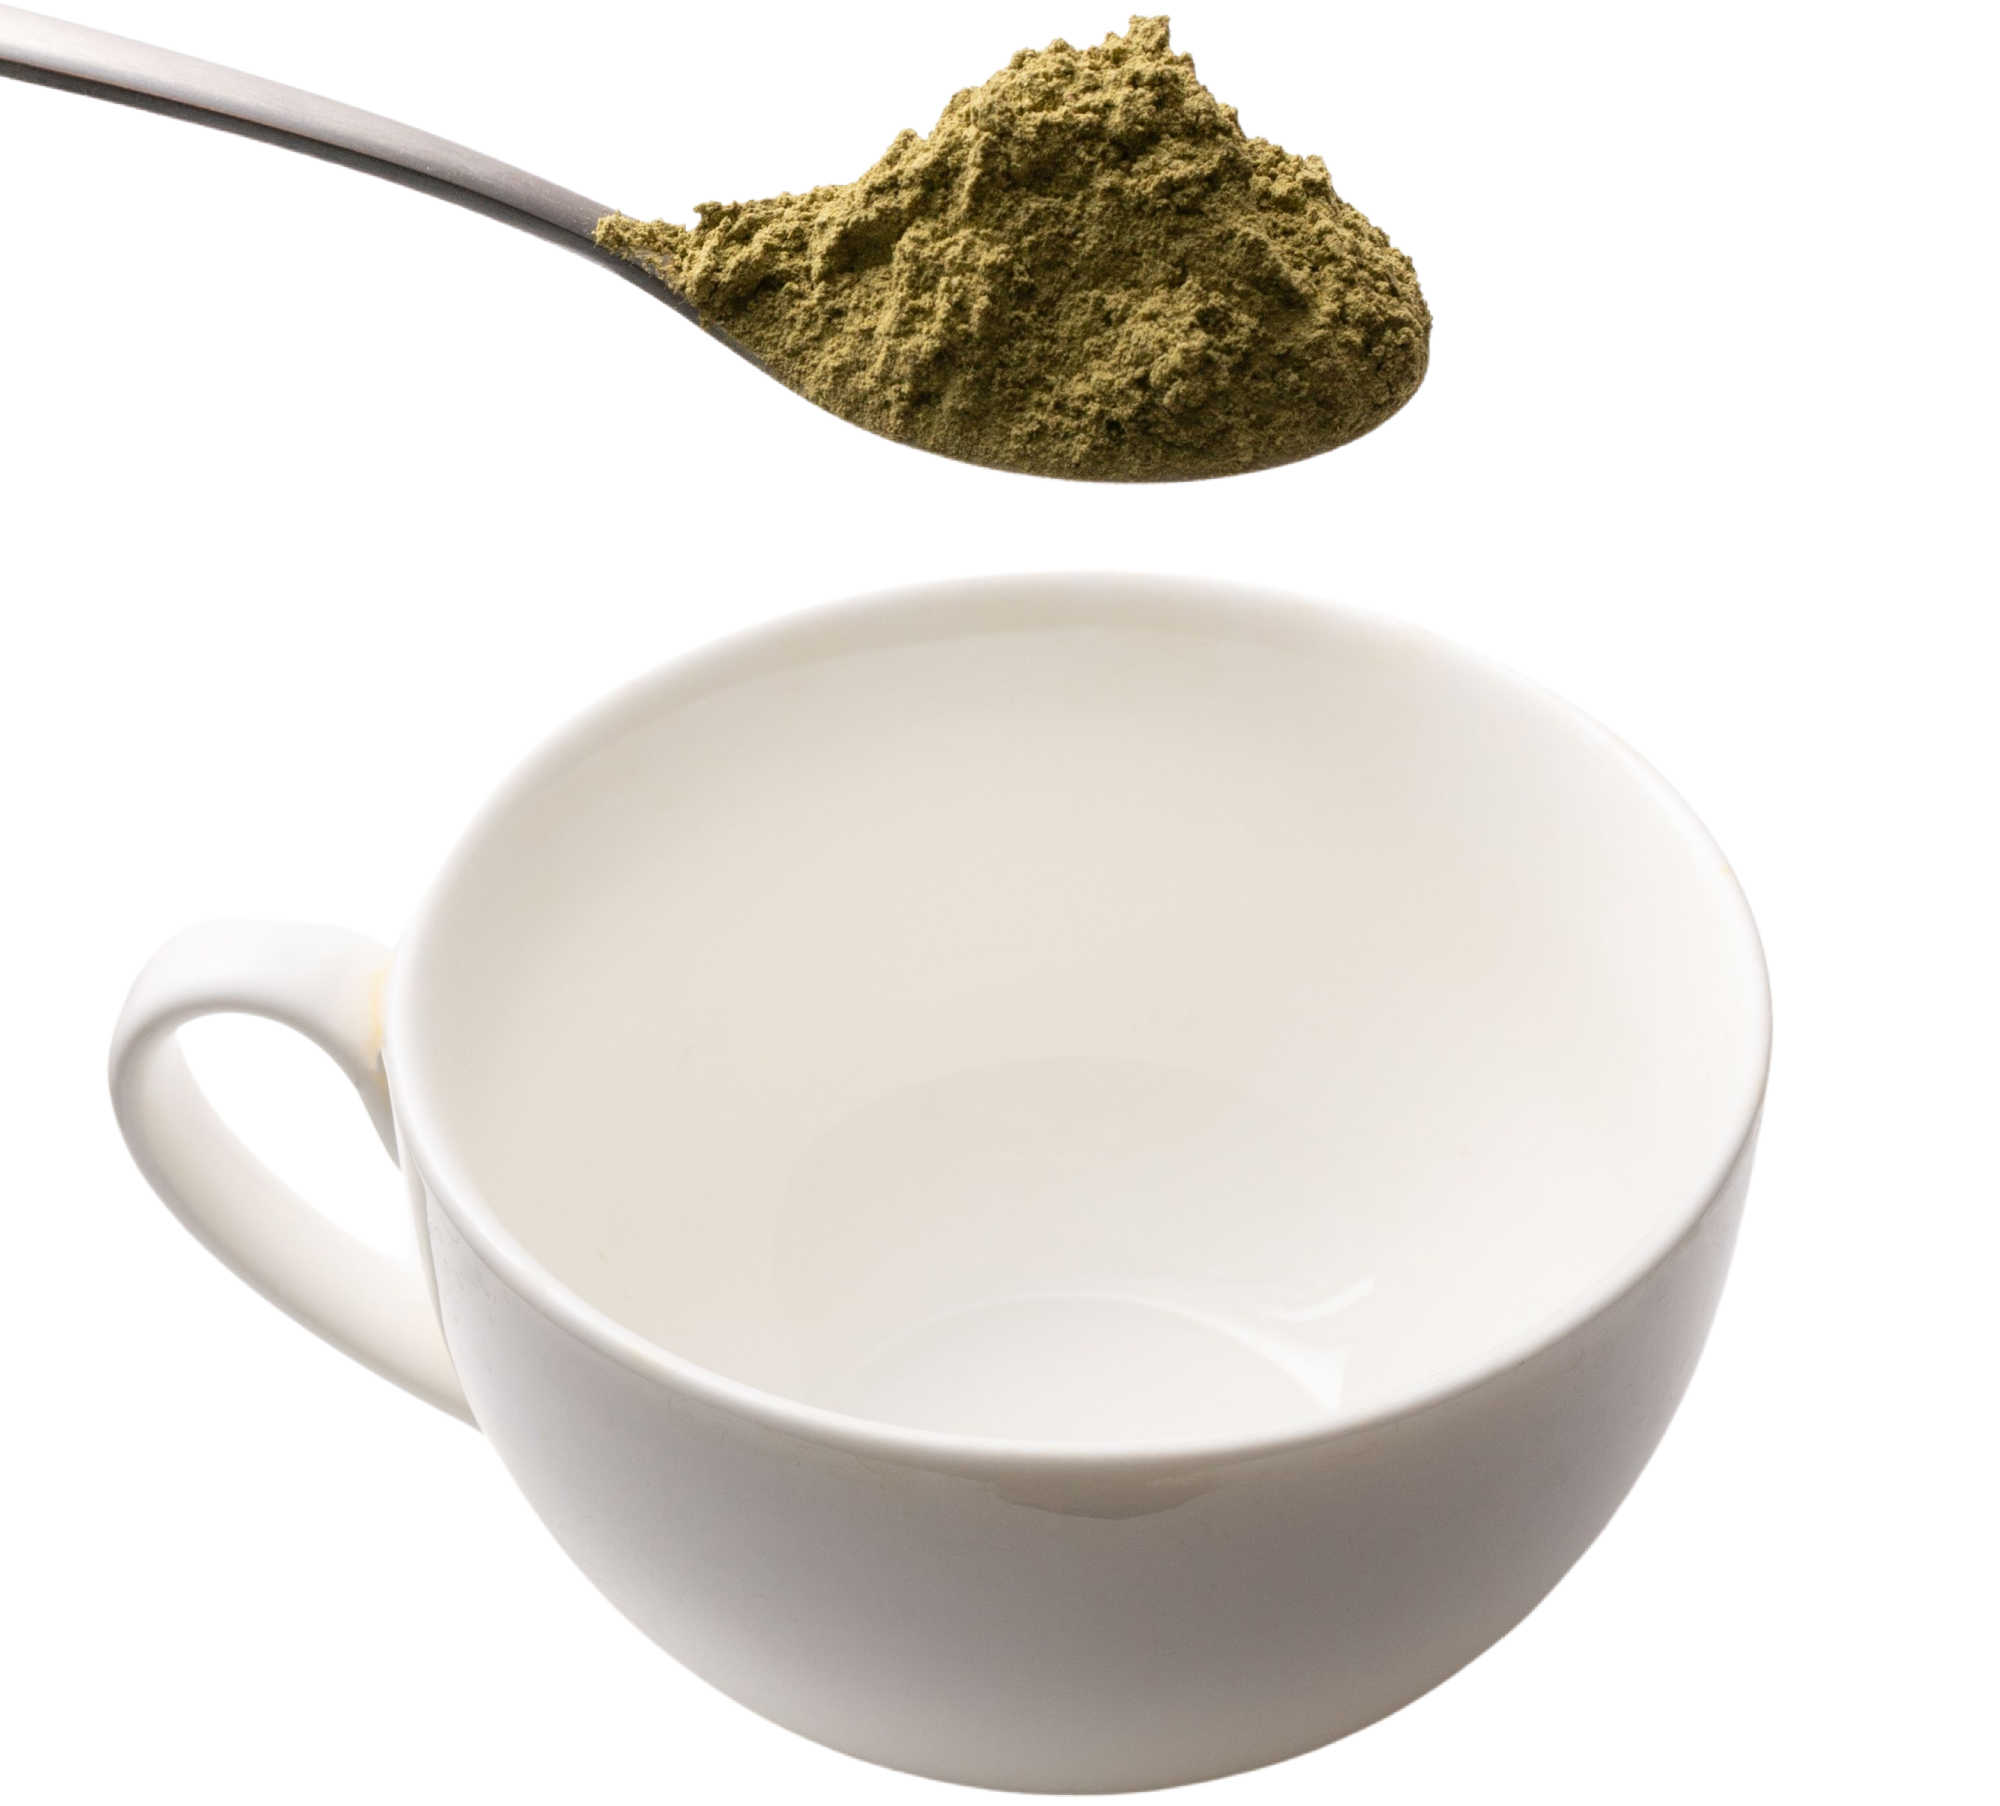 image of kratom extract and powder doses